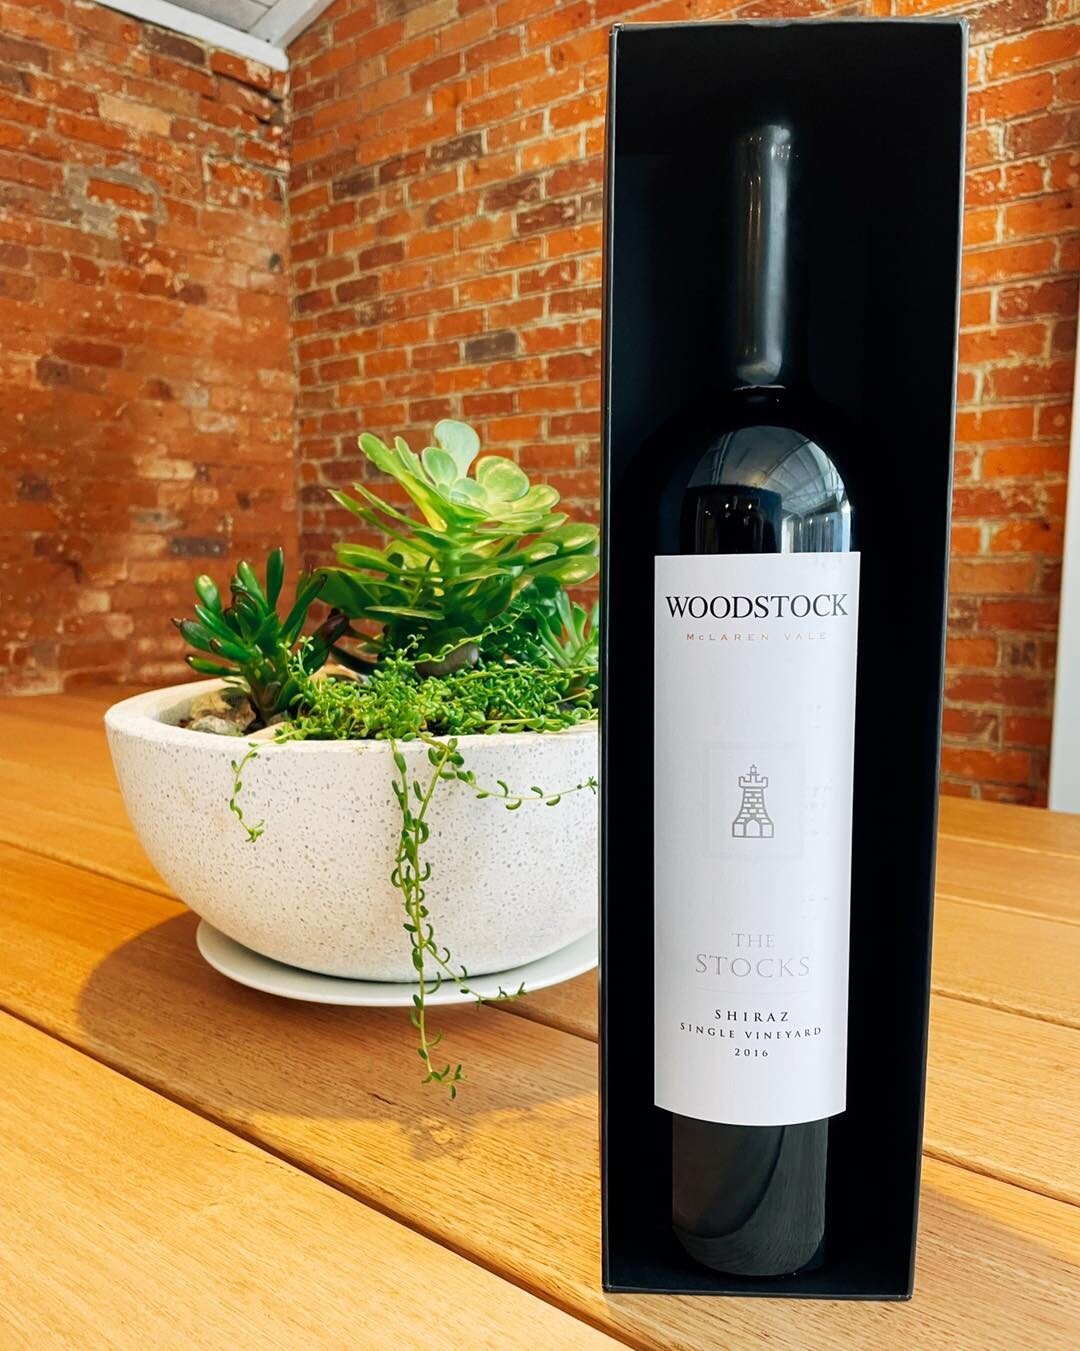 A very limited number of magnums of the 2016 'The Stocks' Shiraz were bottled. The Bottle Shop is lucky enough to have one available. 

Hurry in to snap this one up before it goes!  #shiraz #shirazwine #shirazlover